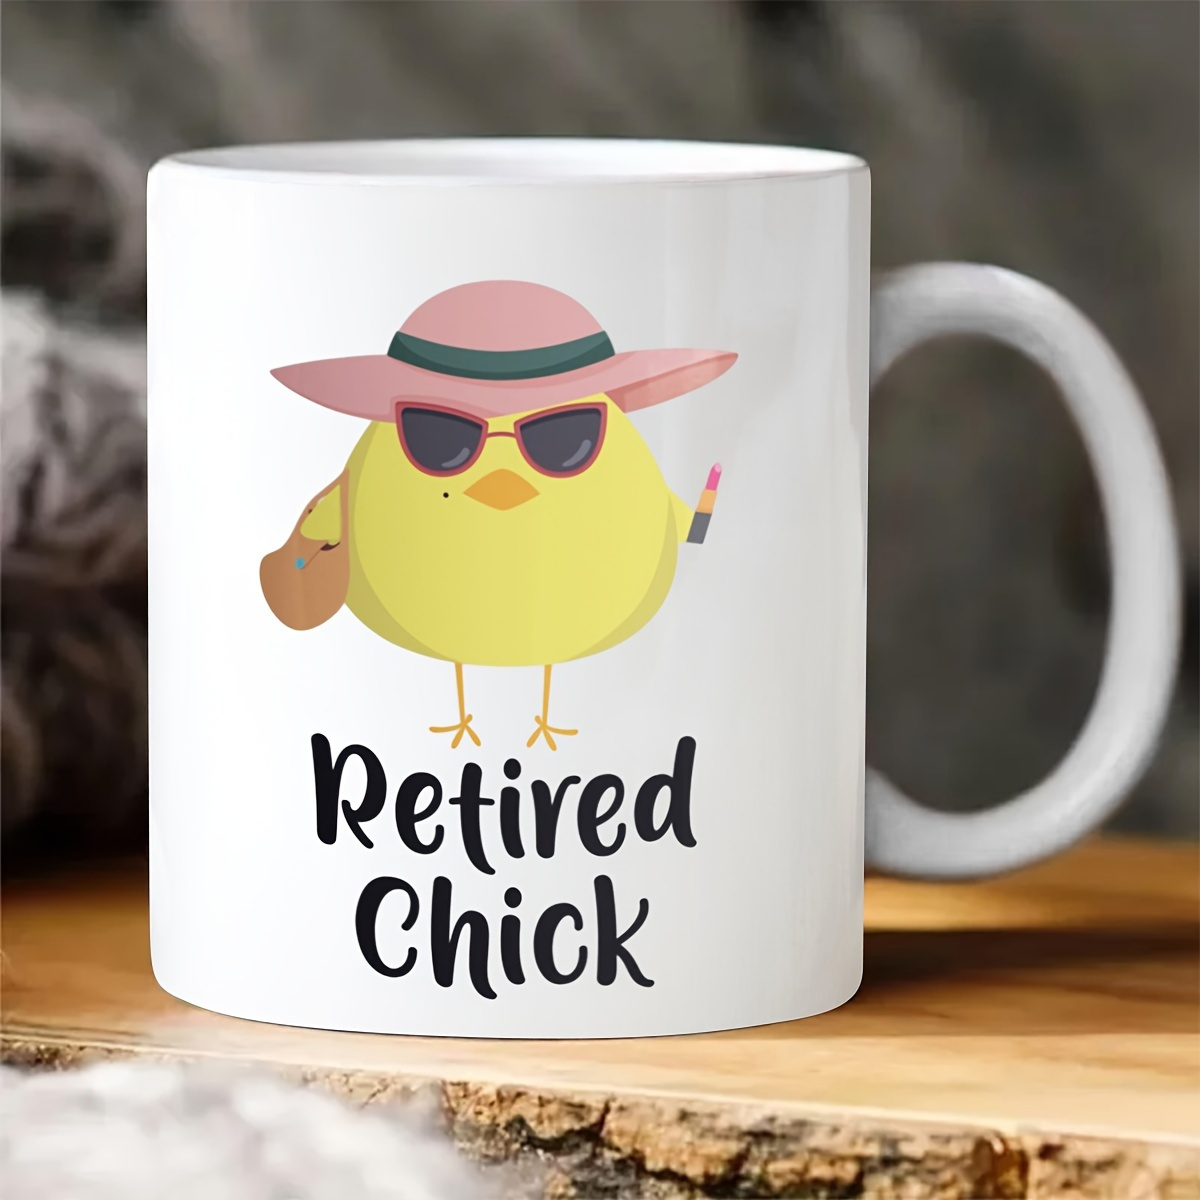 

1pc, Fun Retirement Party Coffee Cup, Ceramic Cup Double-sided Design, Retirement Chicken Cup, Retirement Gift, Gift For Retired Colleagues, Coffee Cup, Teacup, Beverage Ware, Home Decor, Cool Stuff